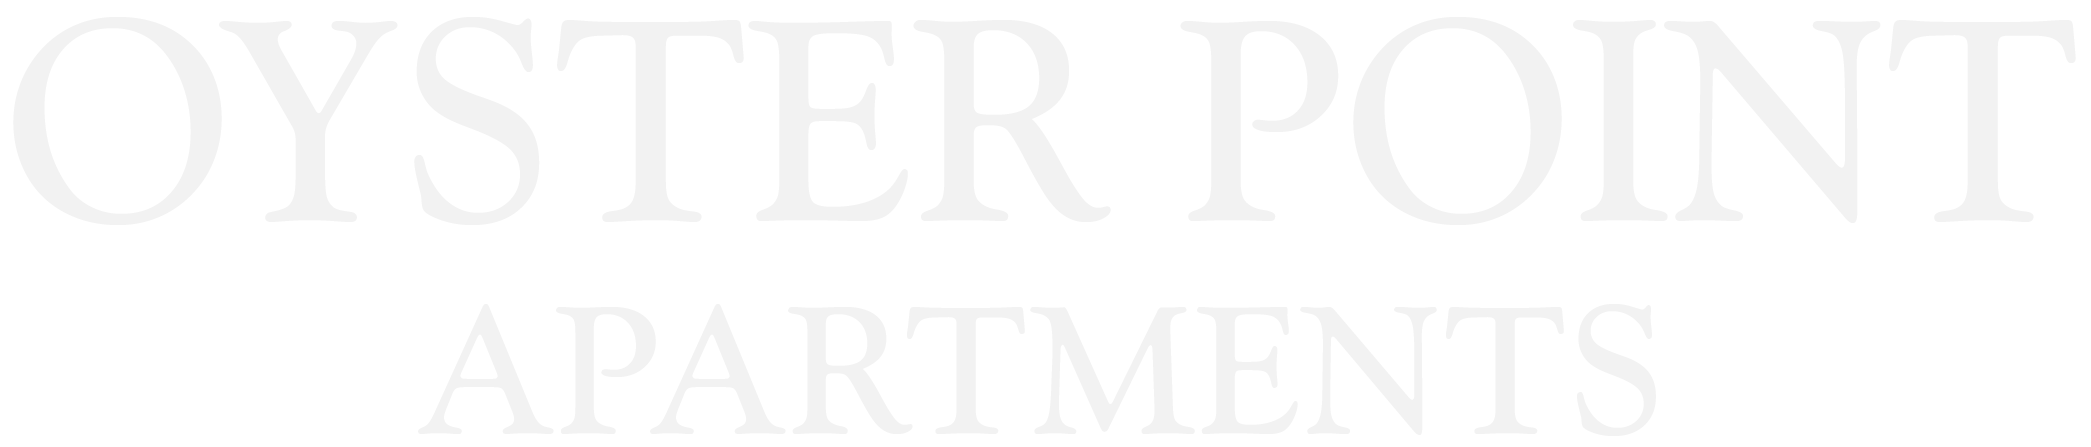 Oyster Point Apartments Logo